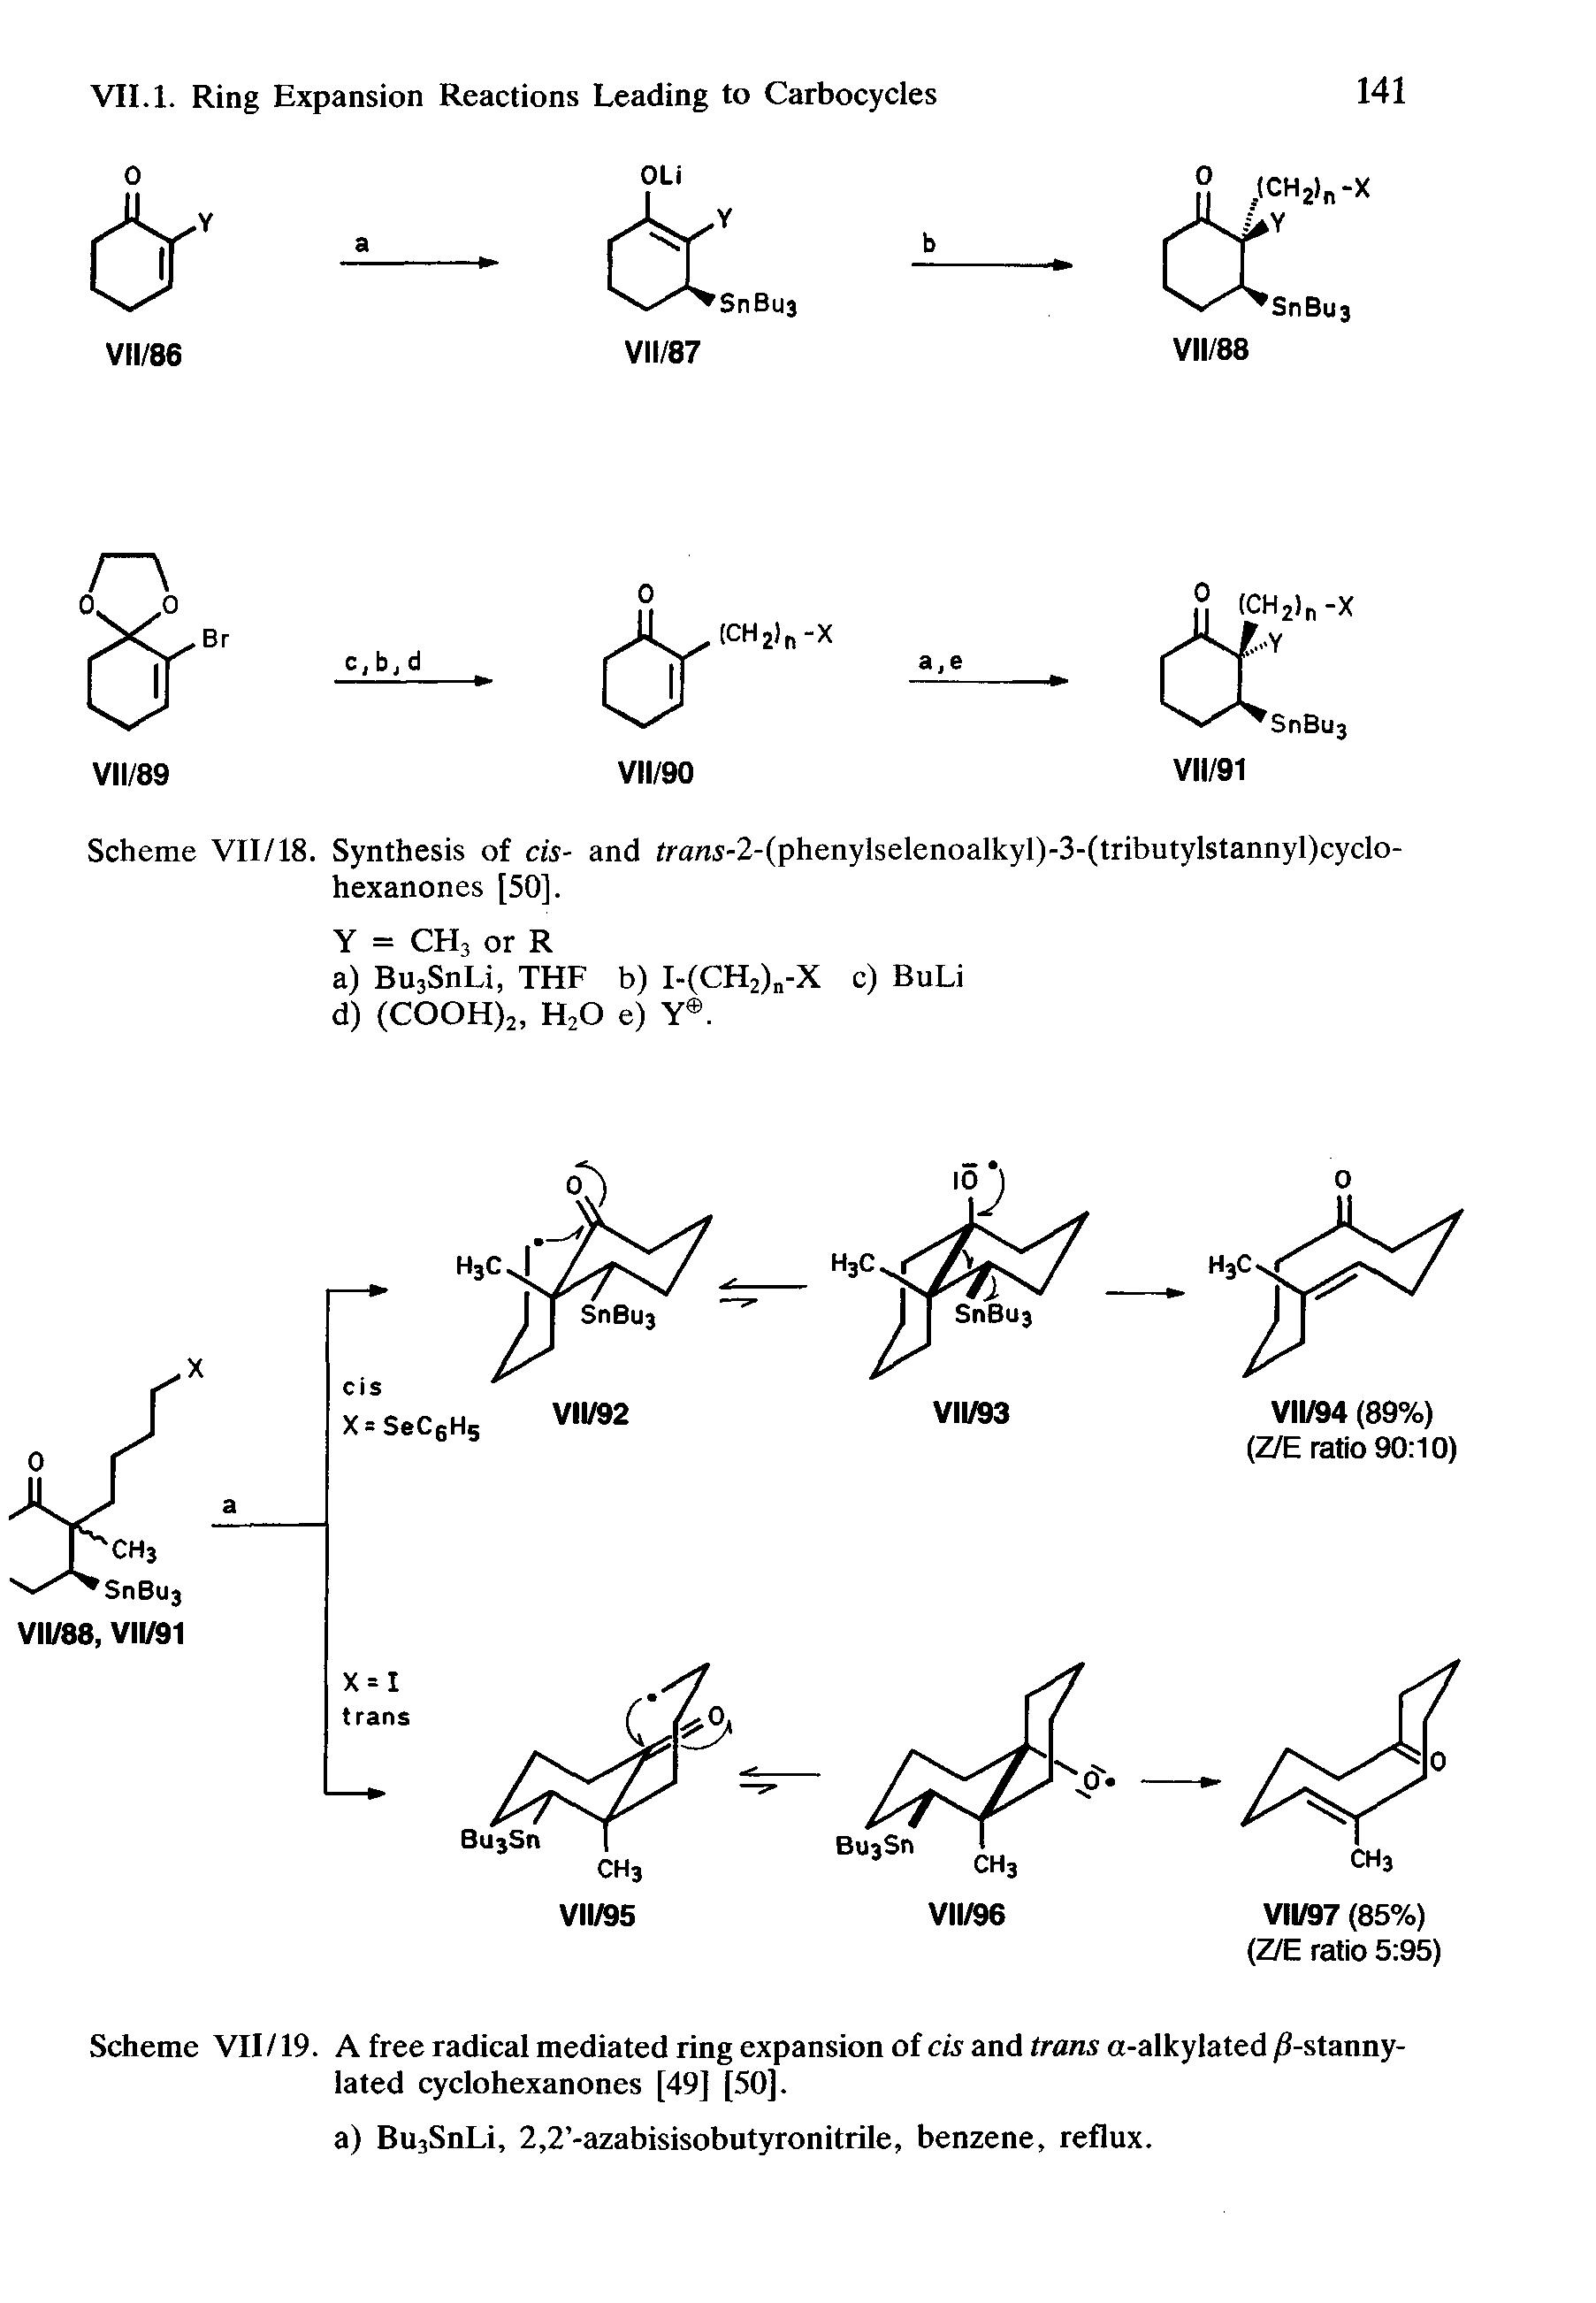 Scheme VII /19. A free radical mediated ring expansion of ds and trans a-alkylated /i-stanny-lated cyclohexanones [49] [50].